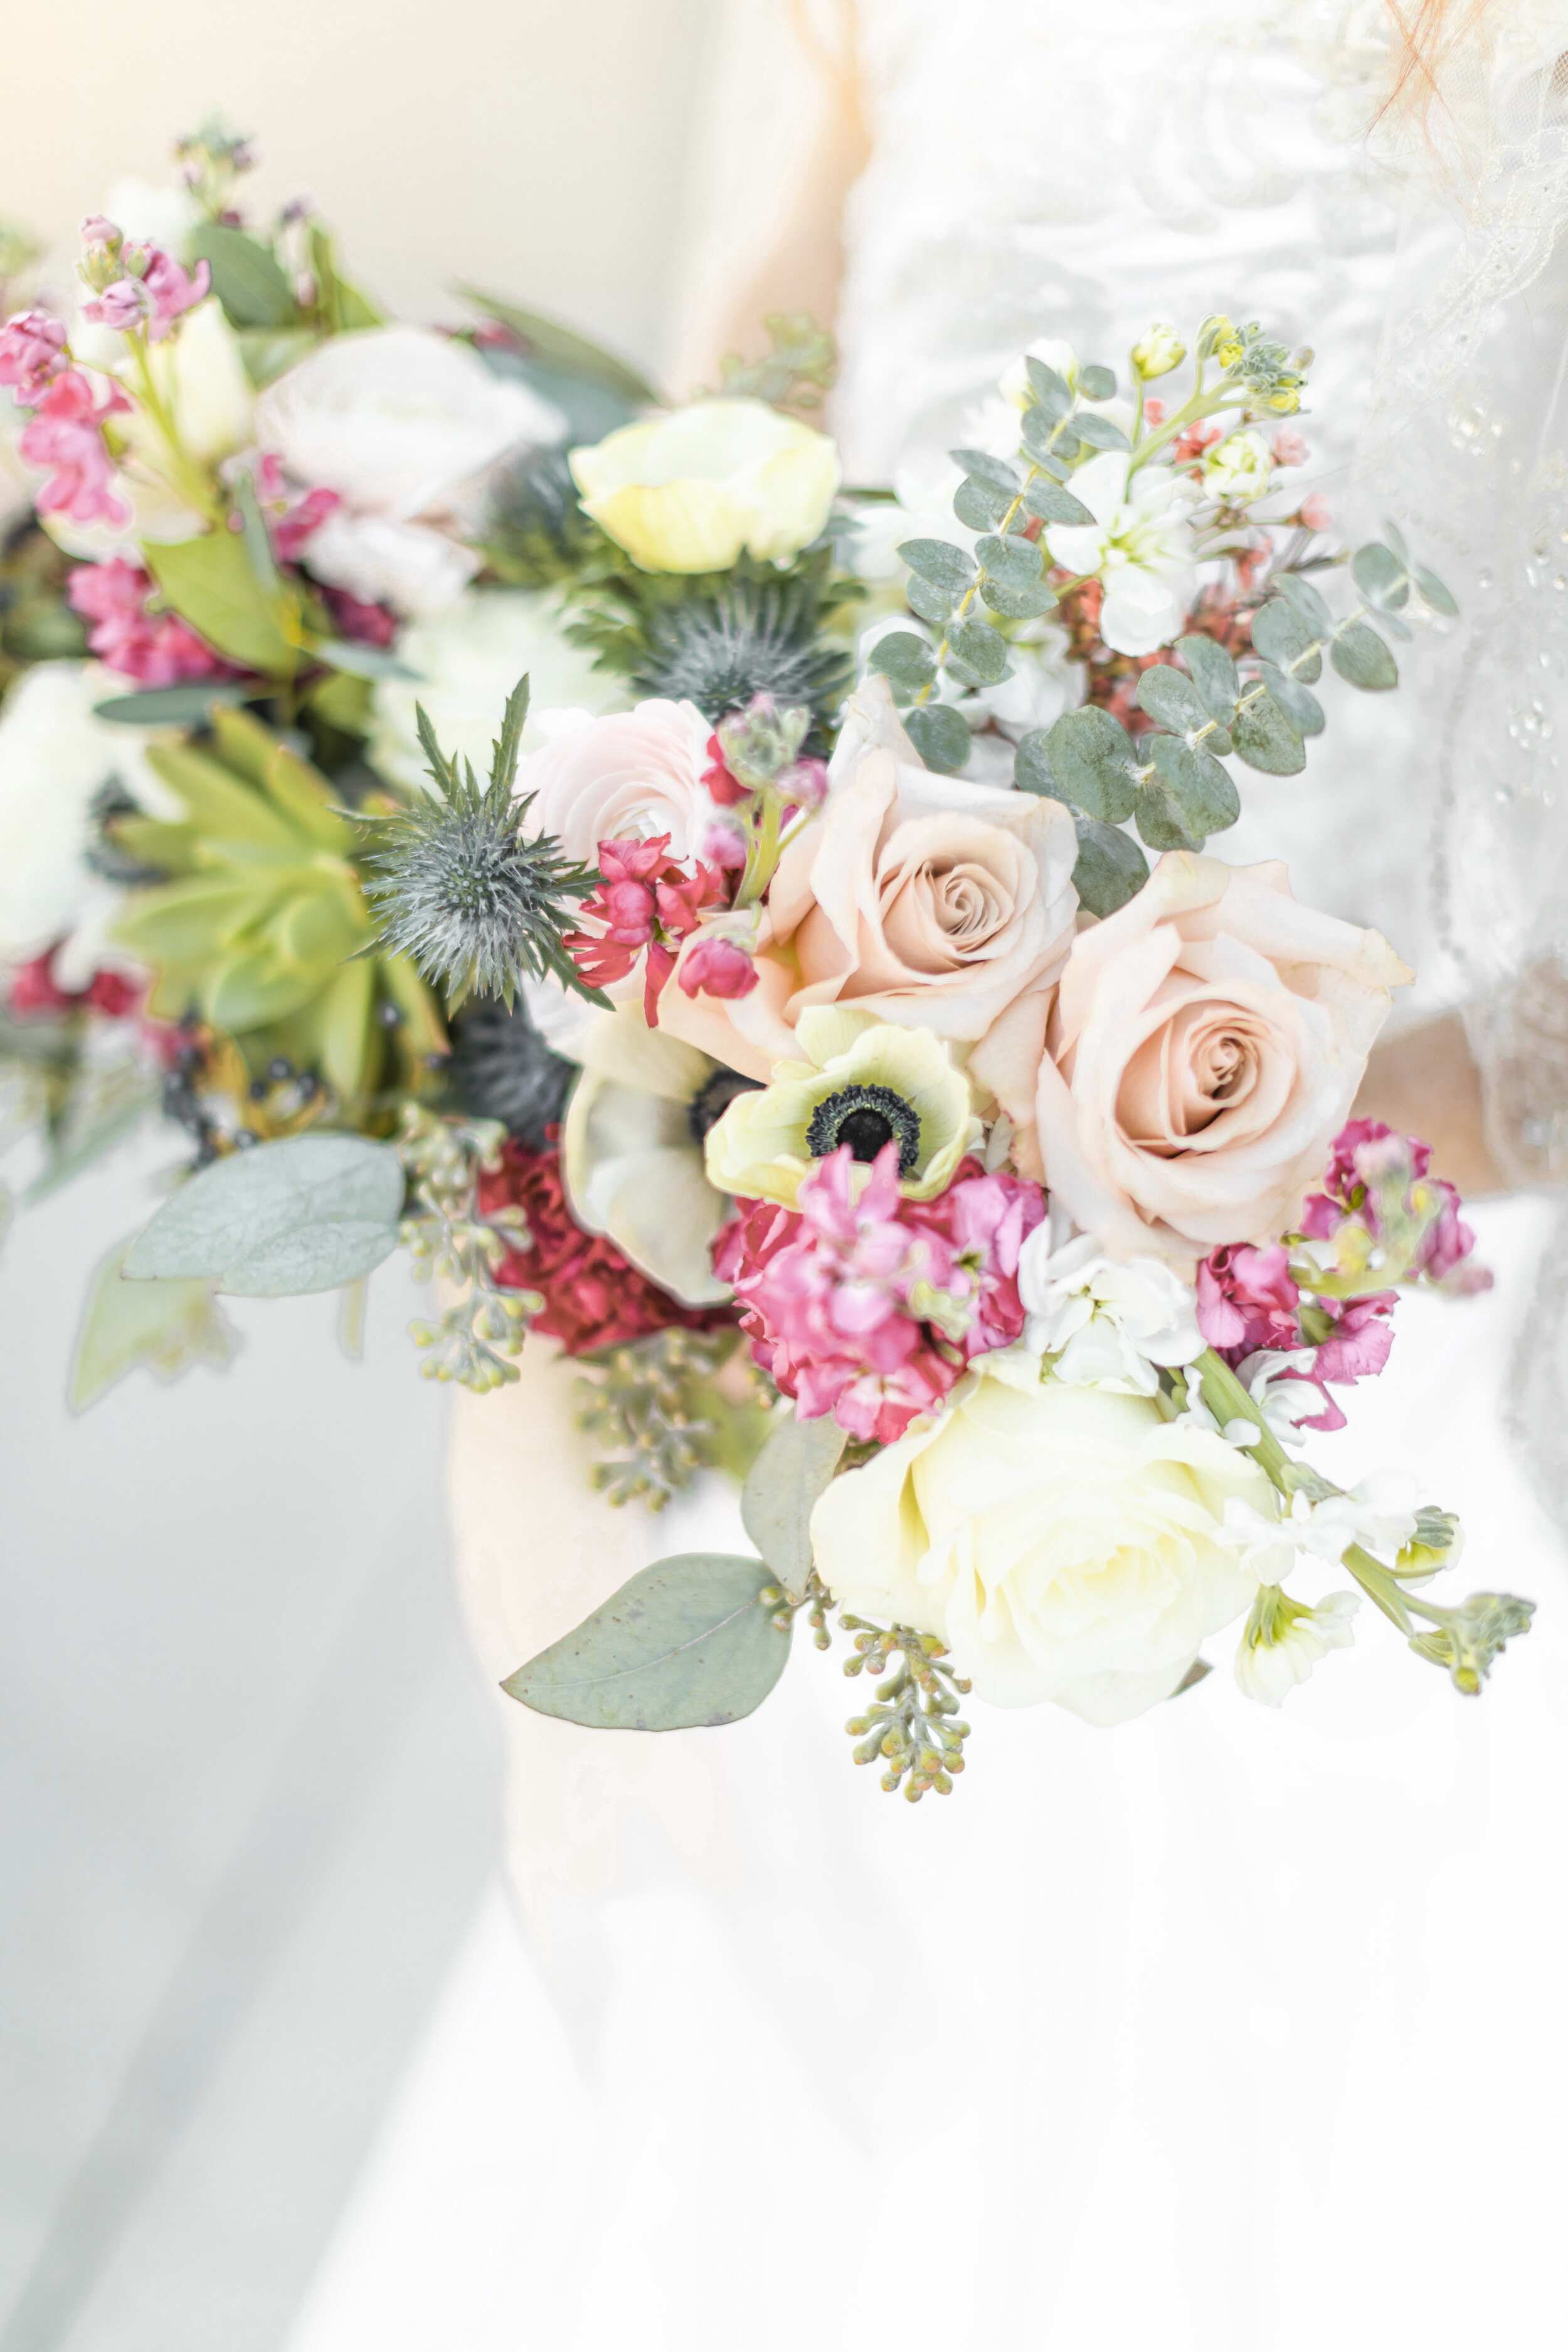  wedding bouquet with roses, poppies and succulents white and pink roses sage greenery unique wedding bouquet fresh flowers wedding bouquet inspo wedding flower ideas pink and green bridal bouquet &nbsp;#claritylanephotography #professionalweddingpho